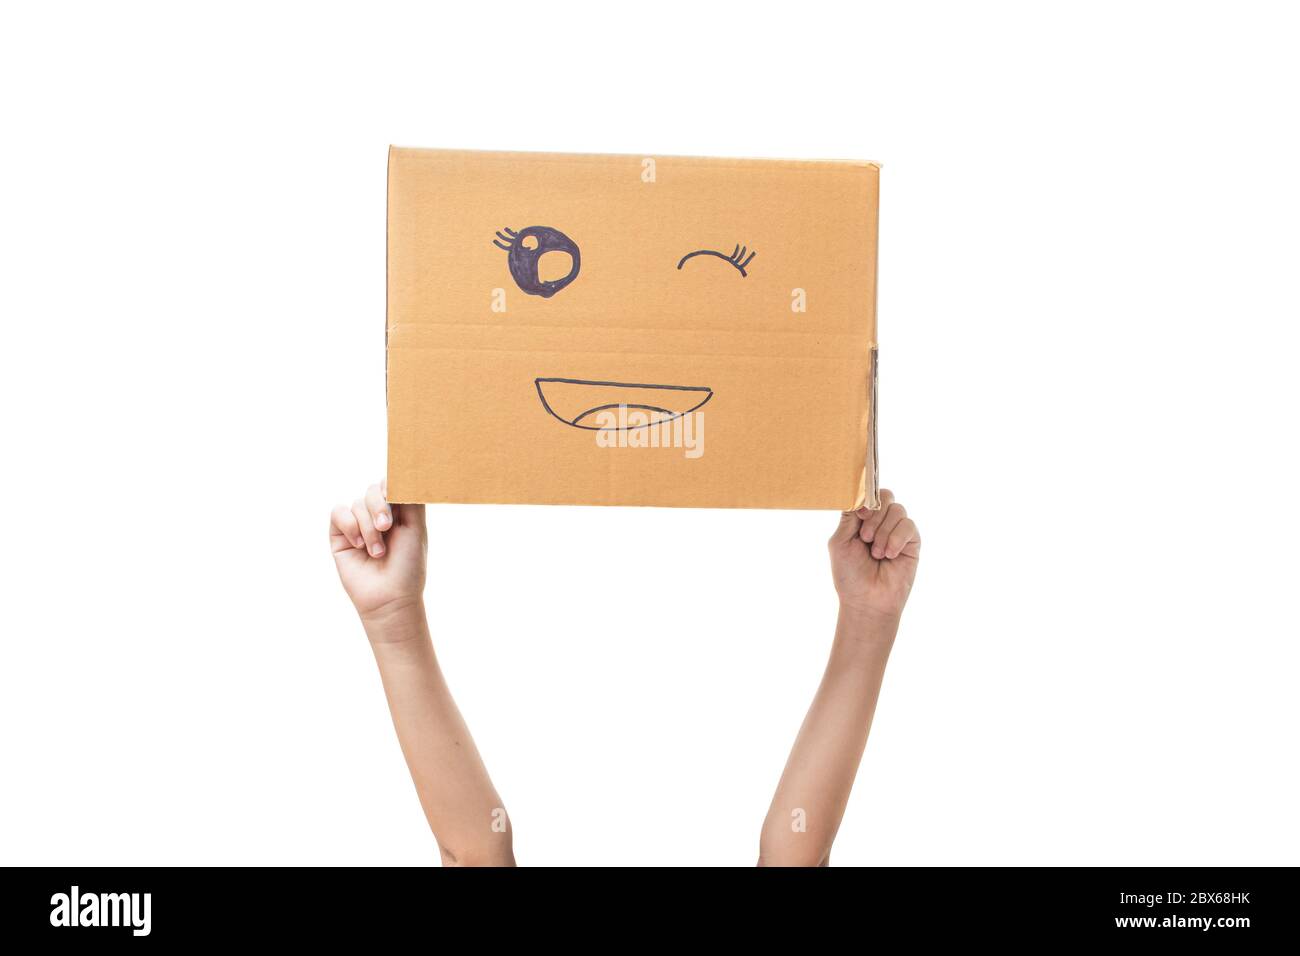 Child hand holding a cardboard box with smiley face isolated on white background. with clipping path. Stock Photo